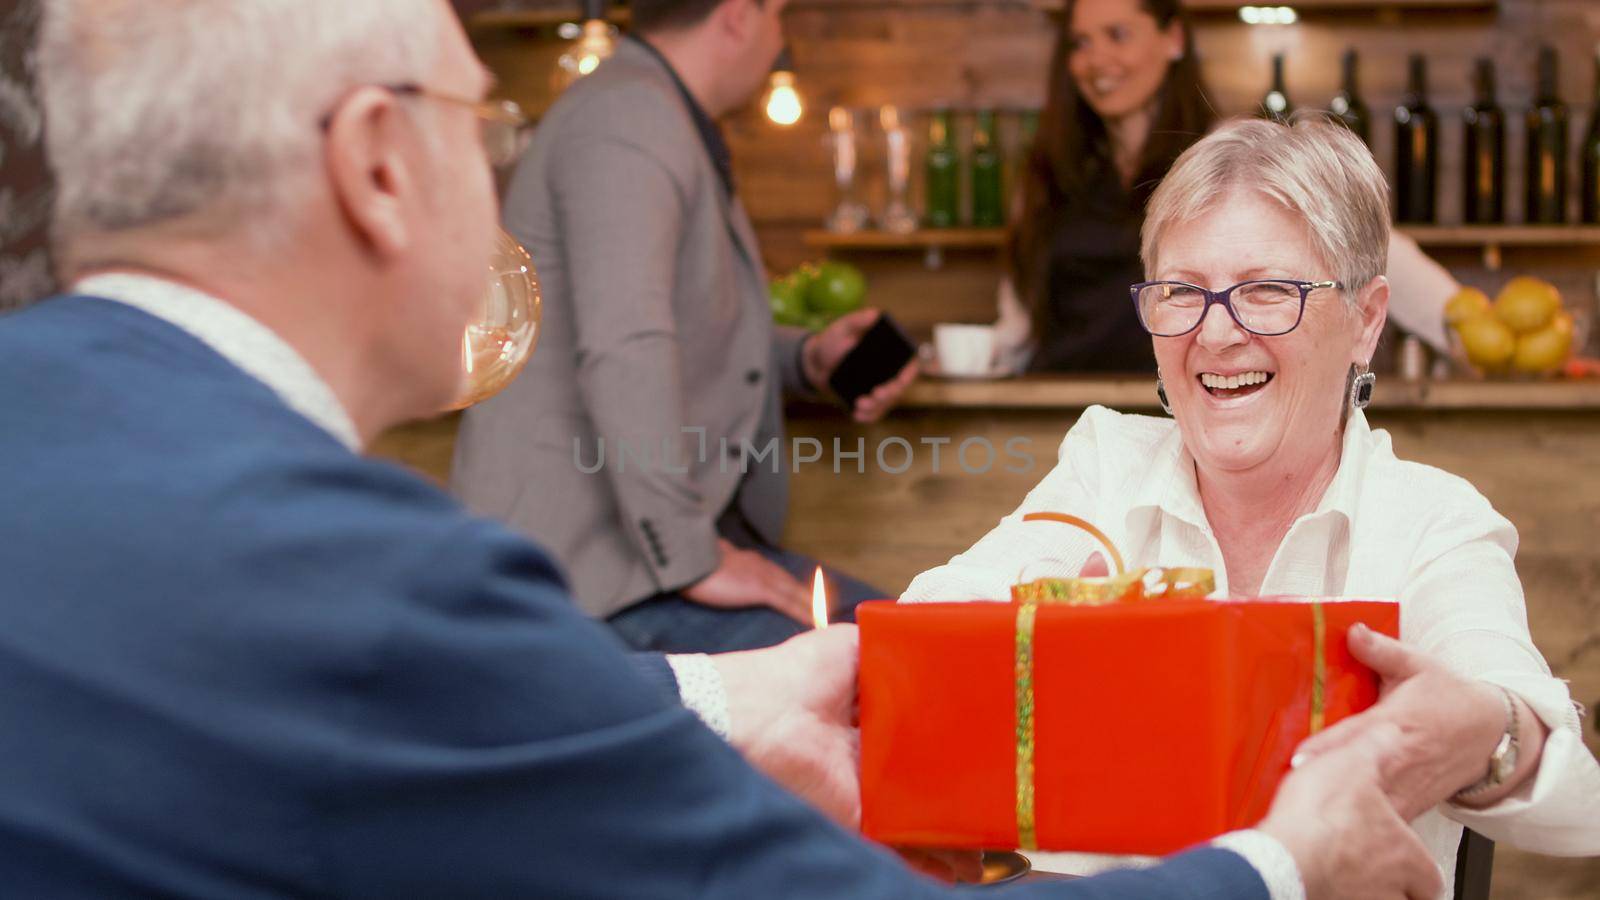 Happy senior woman when she's receiving a red gift box from her husband during their date by DCStudio